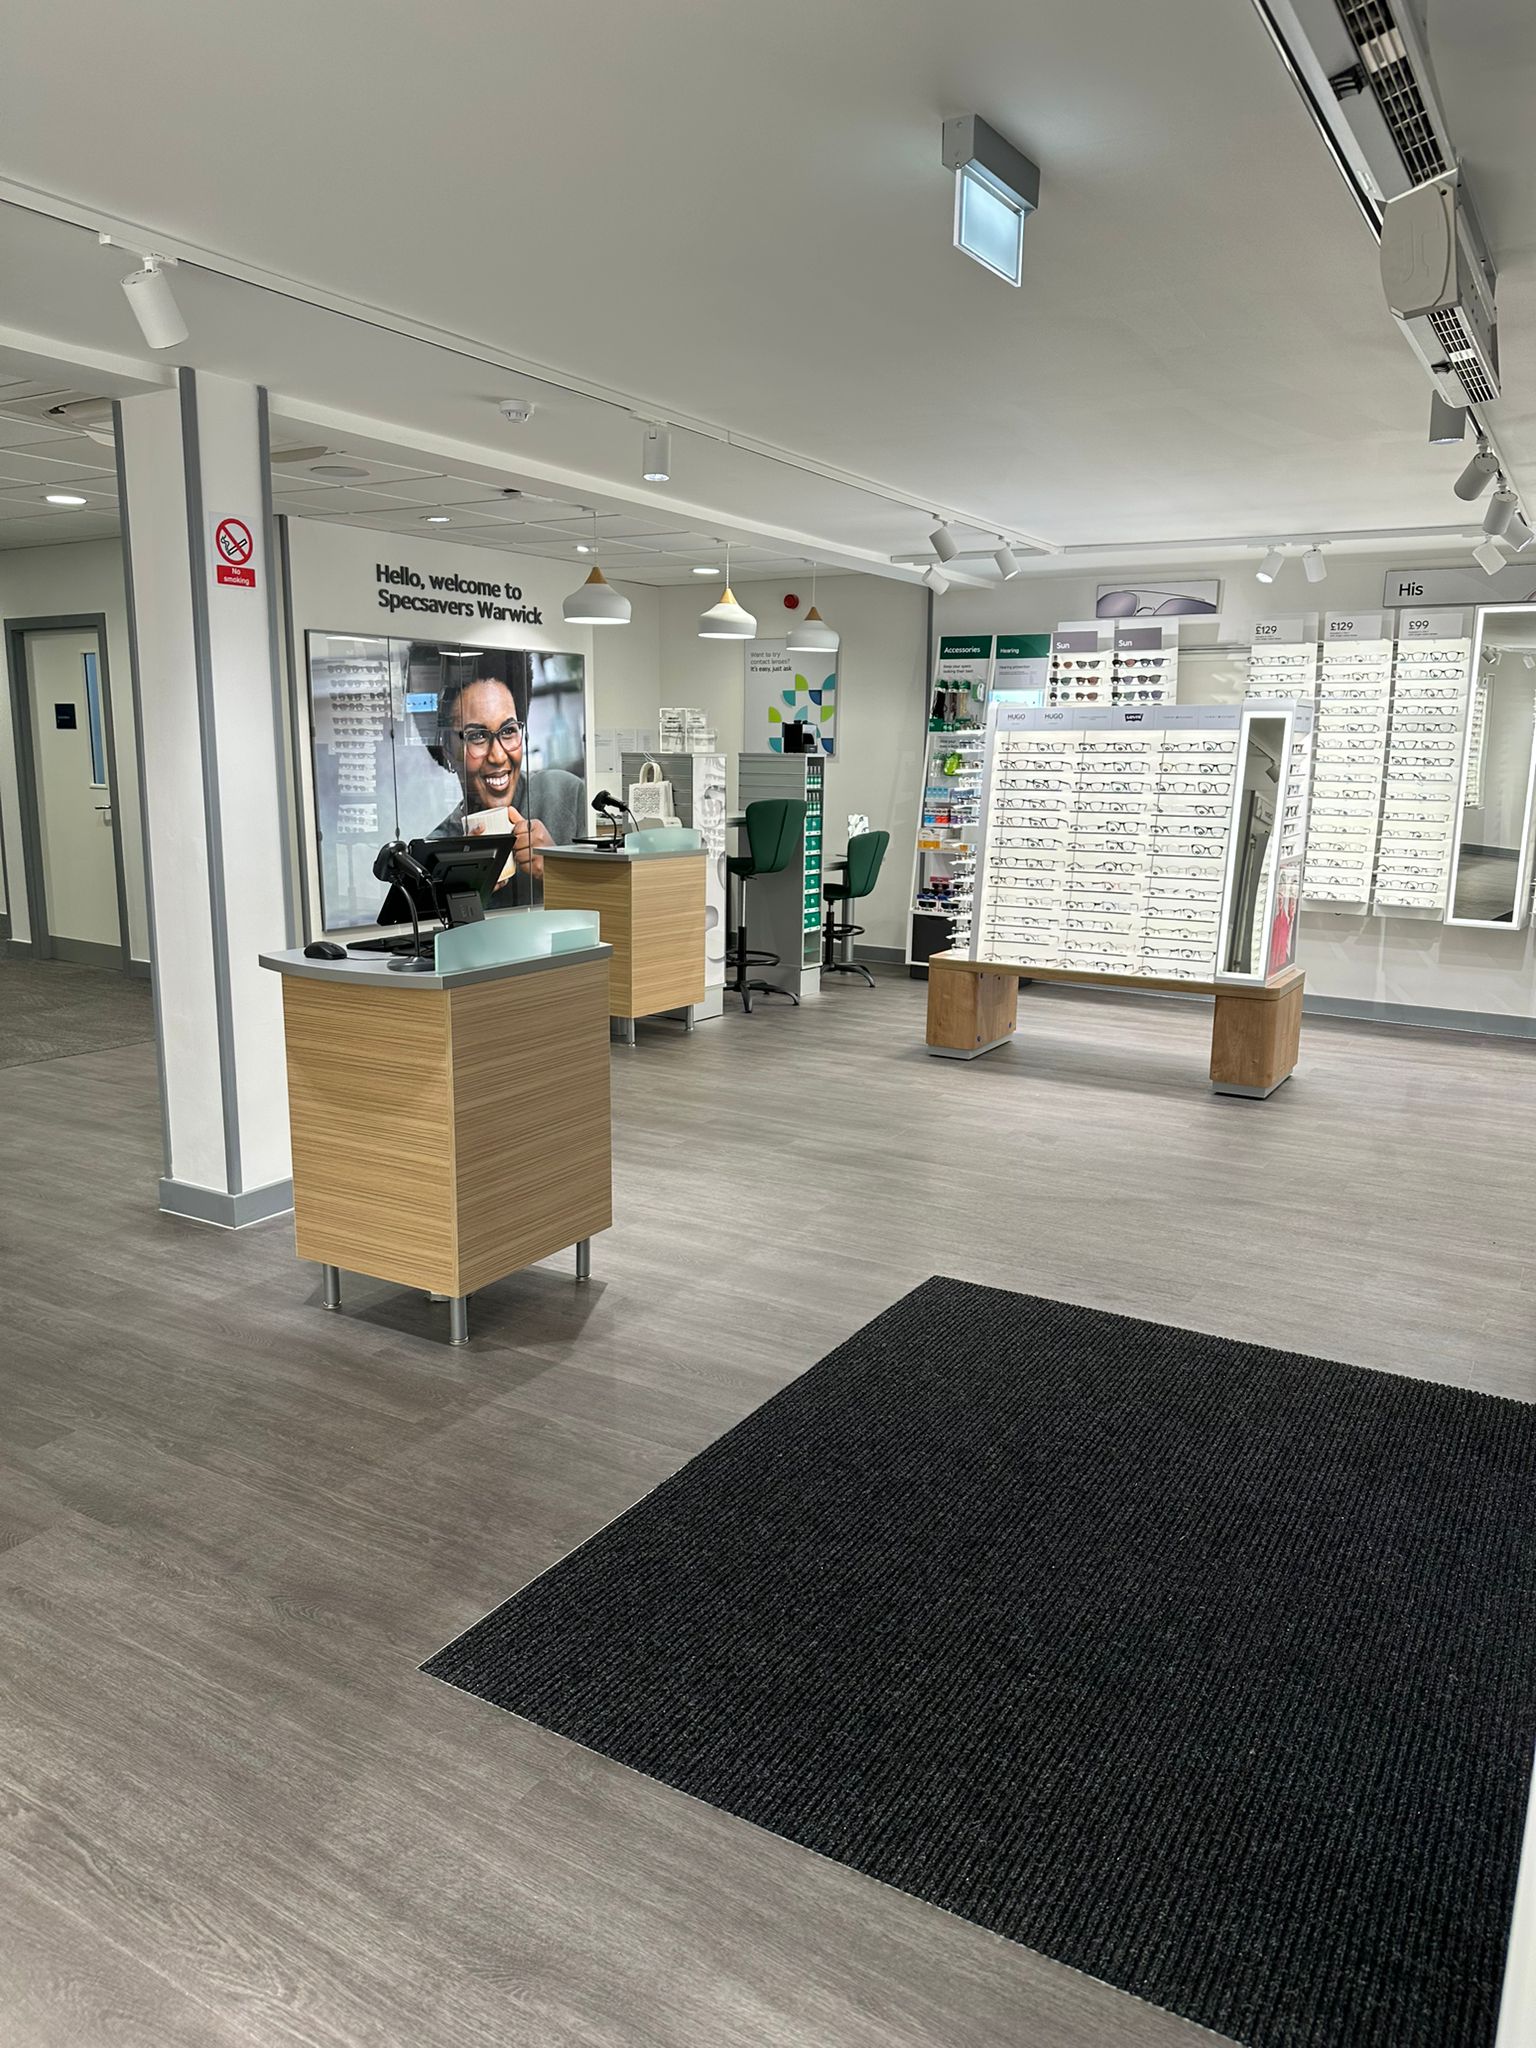 Images Specsavers Opticians and Audiologists - Warwick